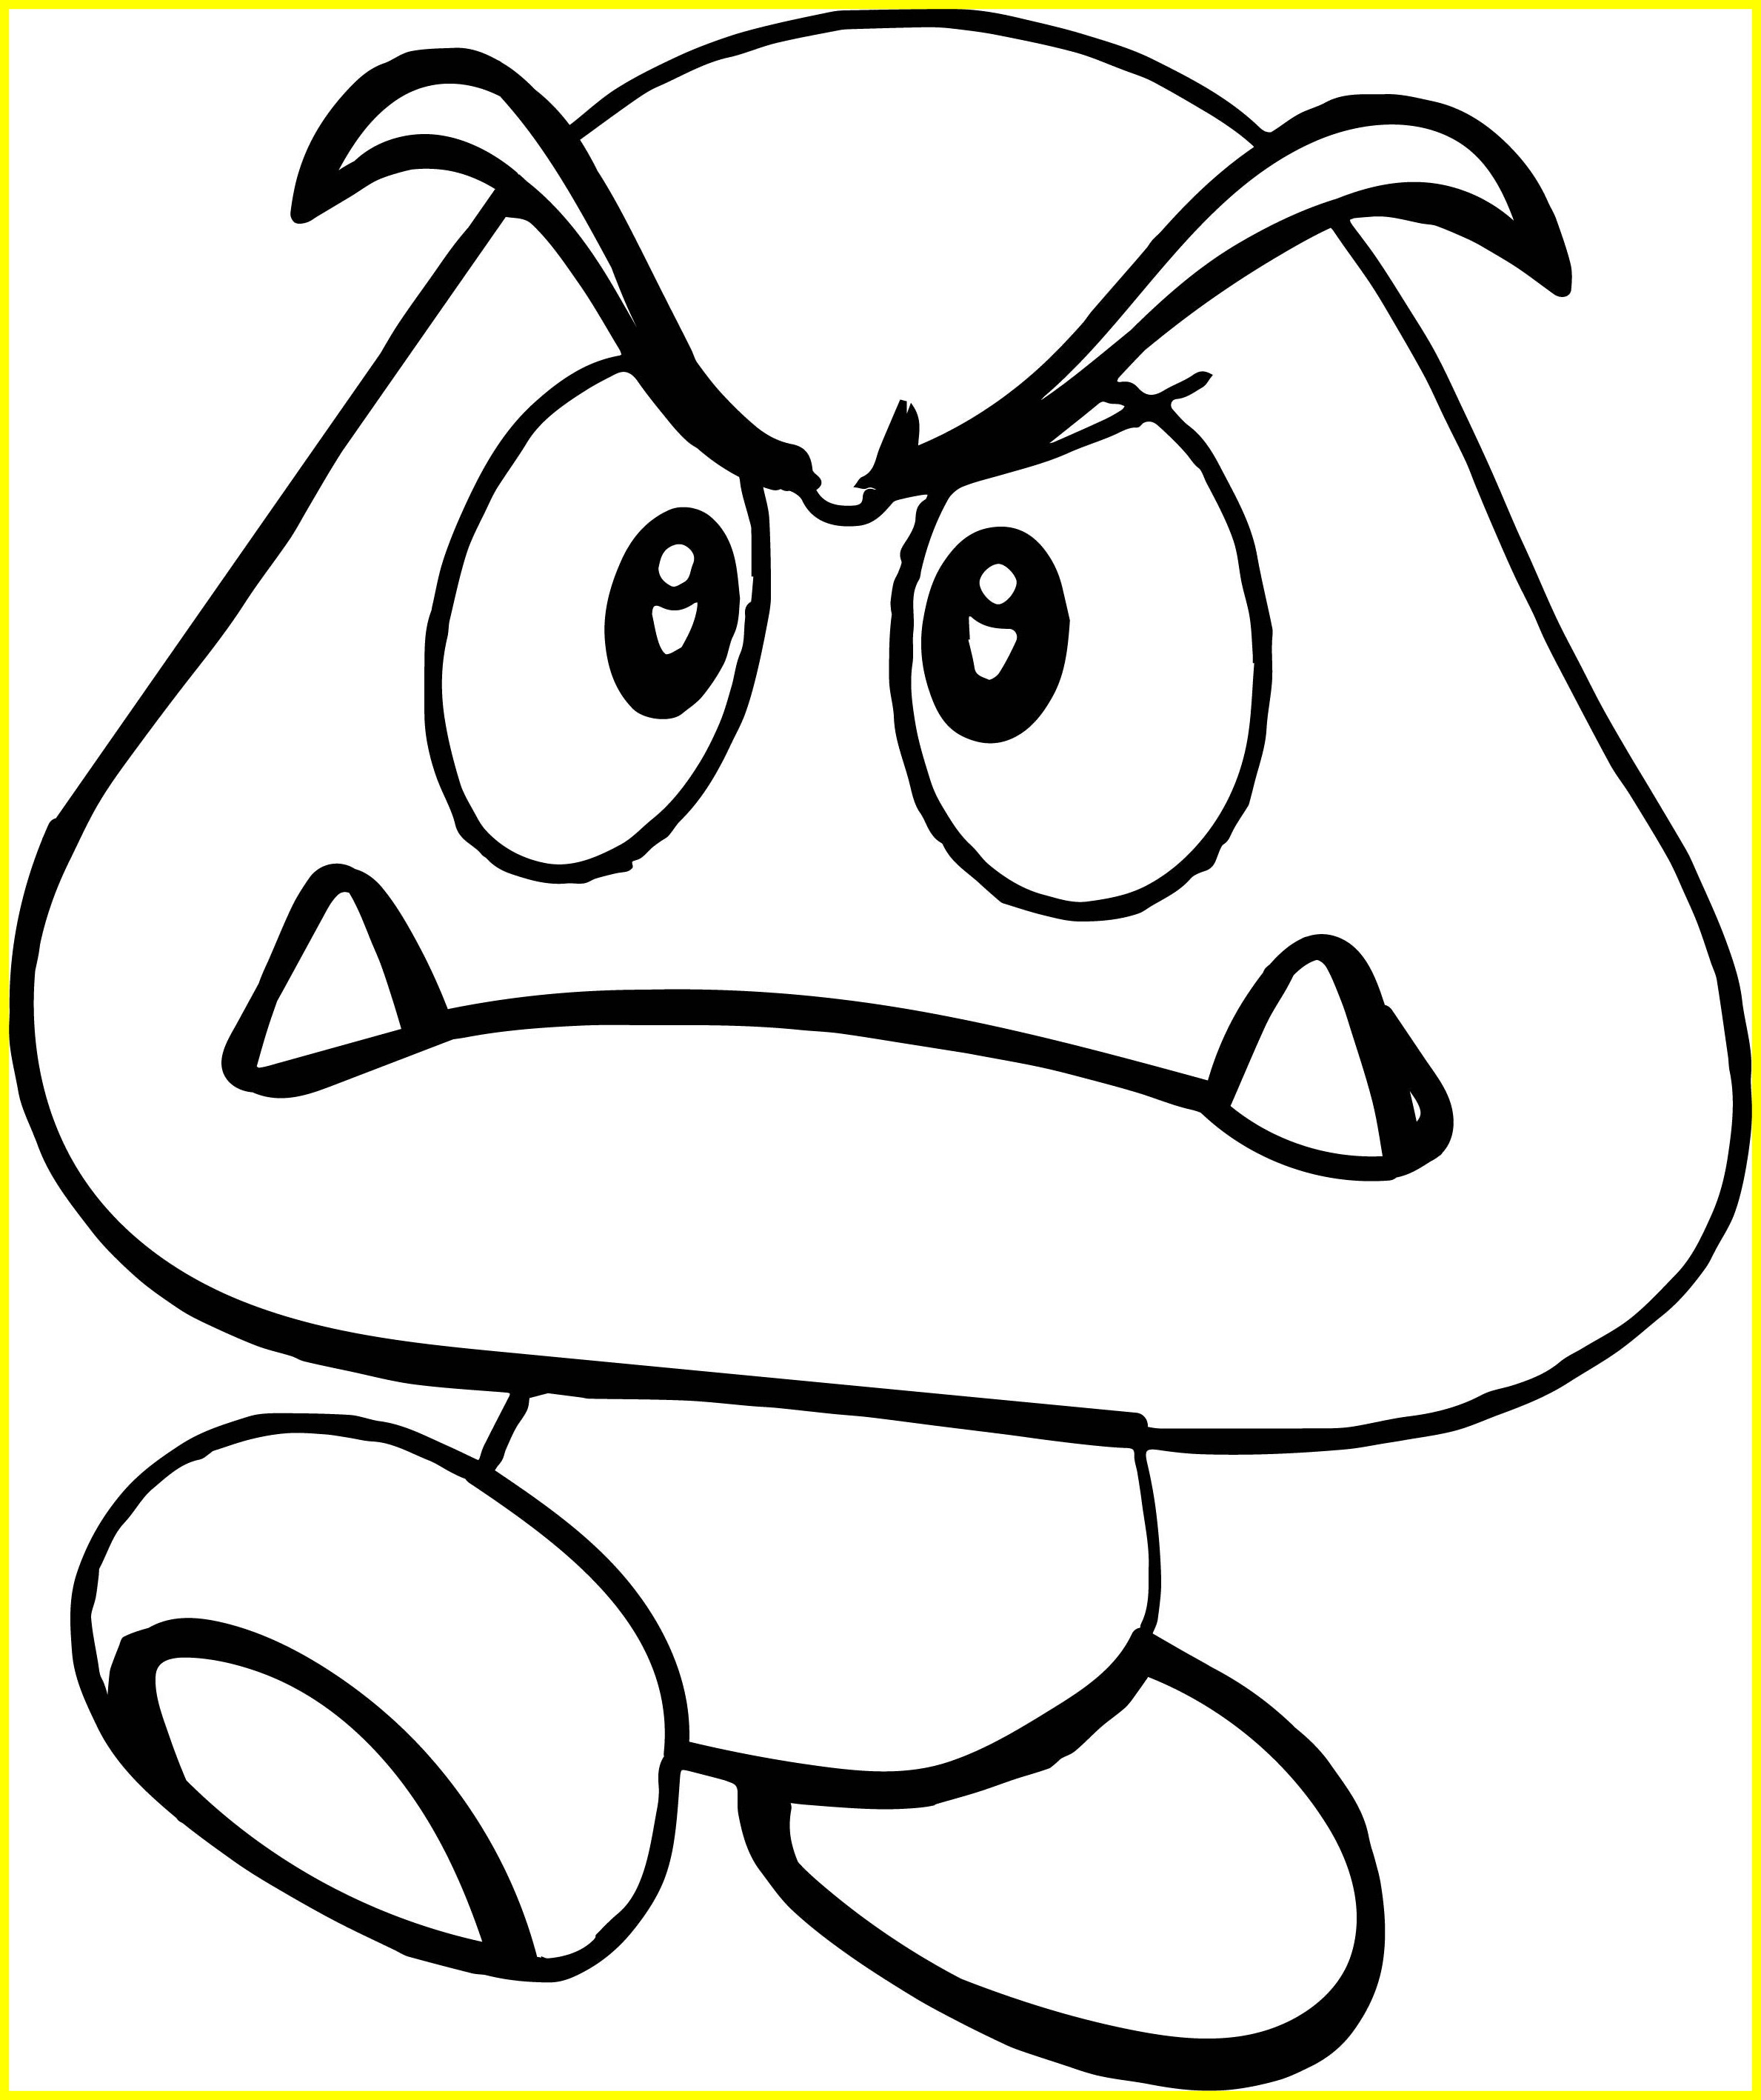 Paper Mario Sticker Star Coloring Pages at GetColorings.com | Free ...